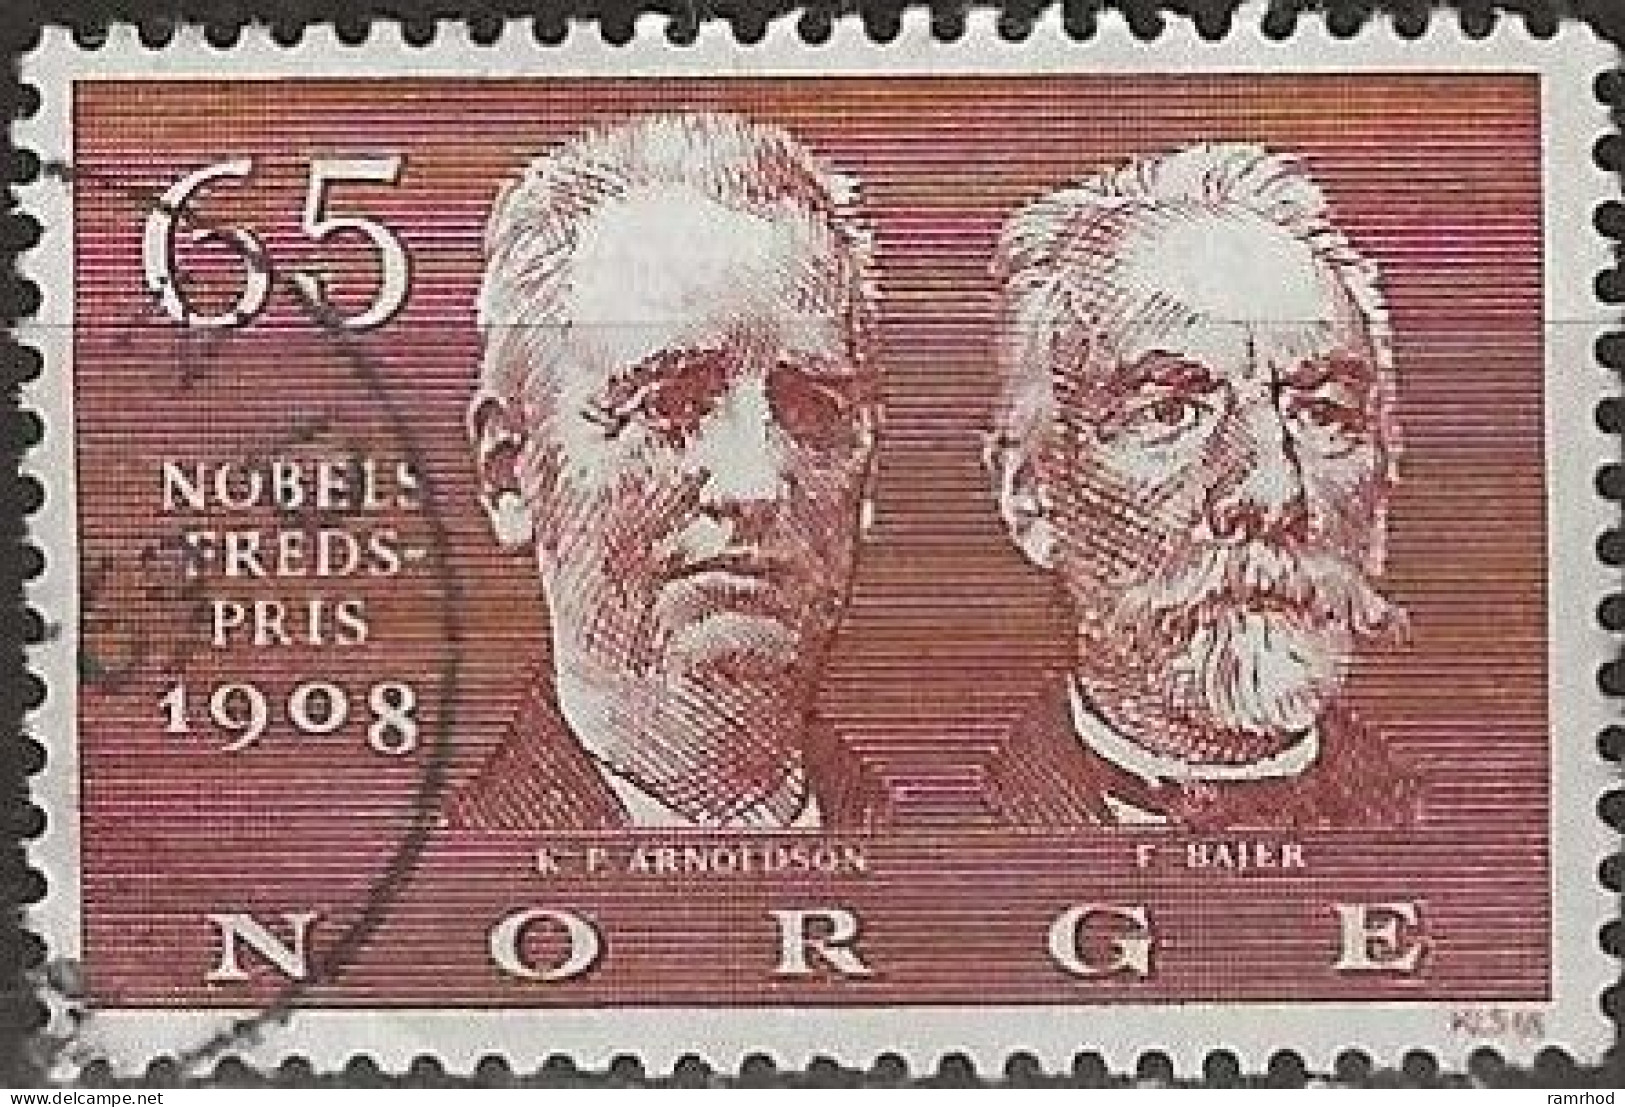 NORWAY 1968 Nobel Peace Prize Winners Of 1908 - 65ore Arnoldson And Bajer FU - Oblitérés